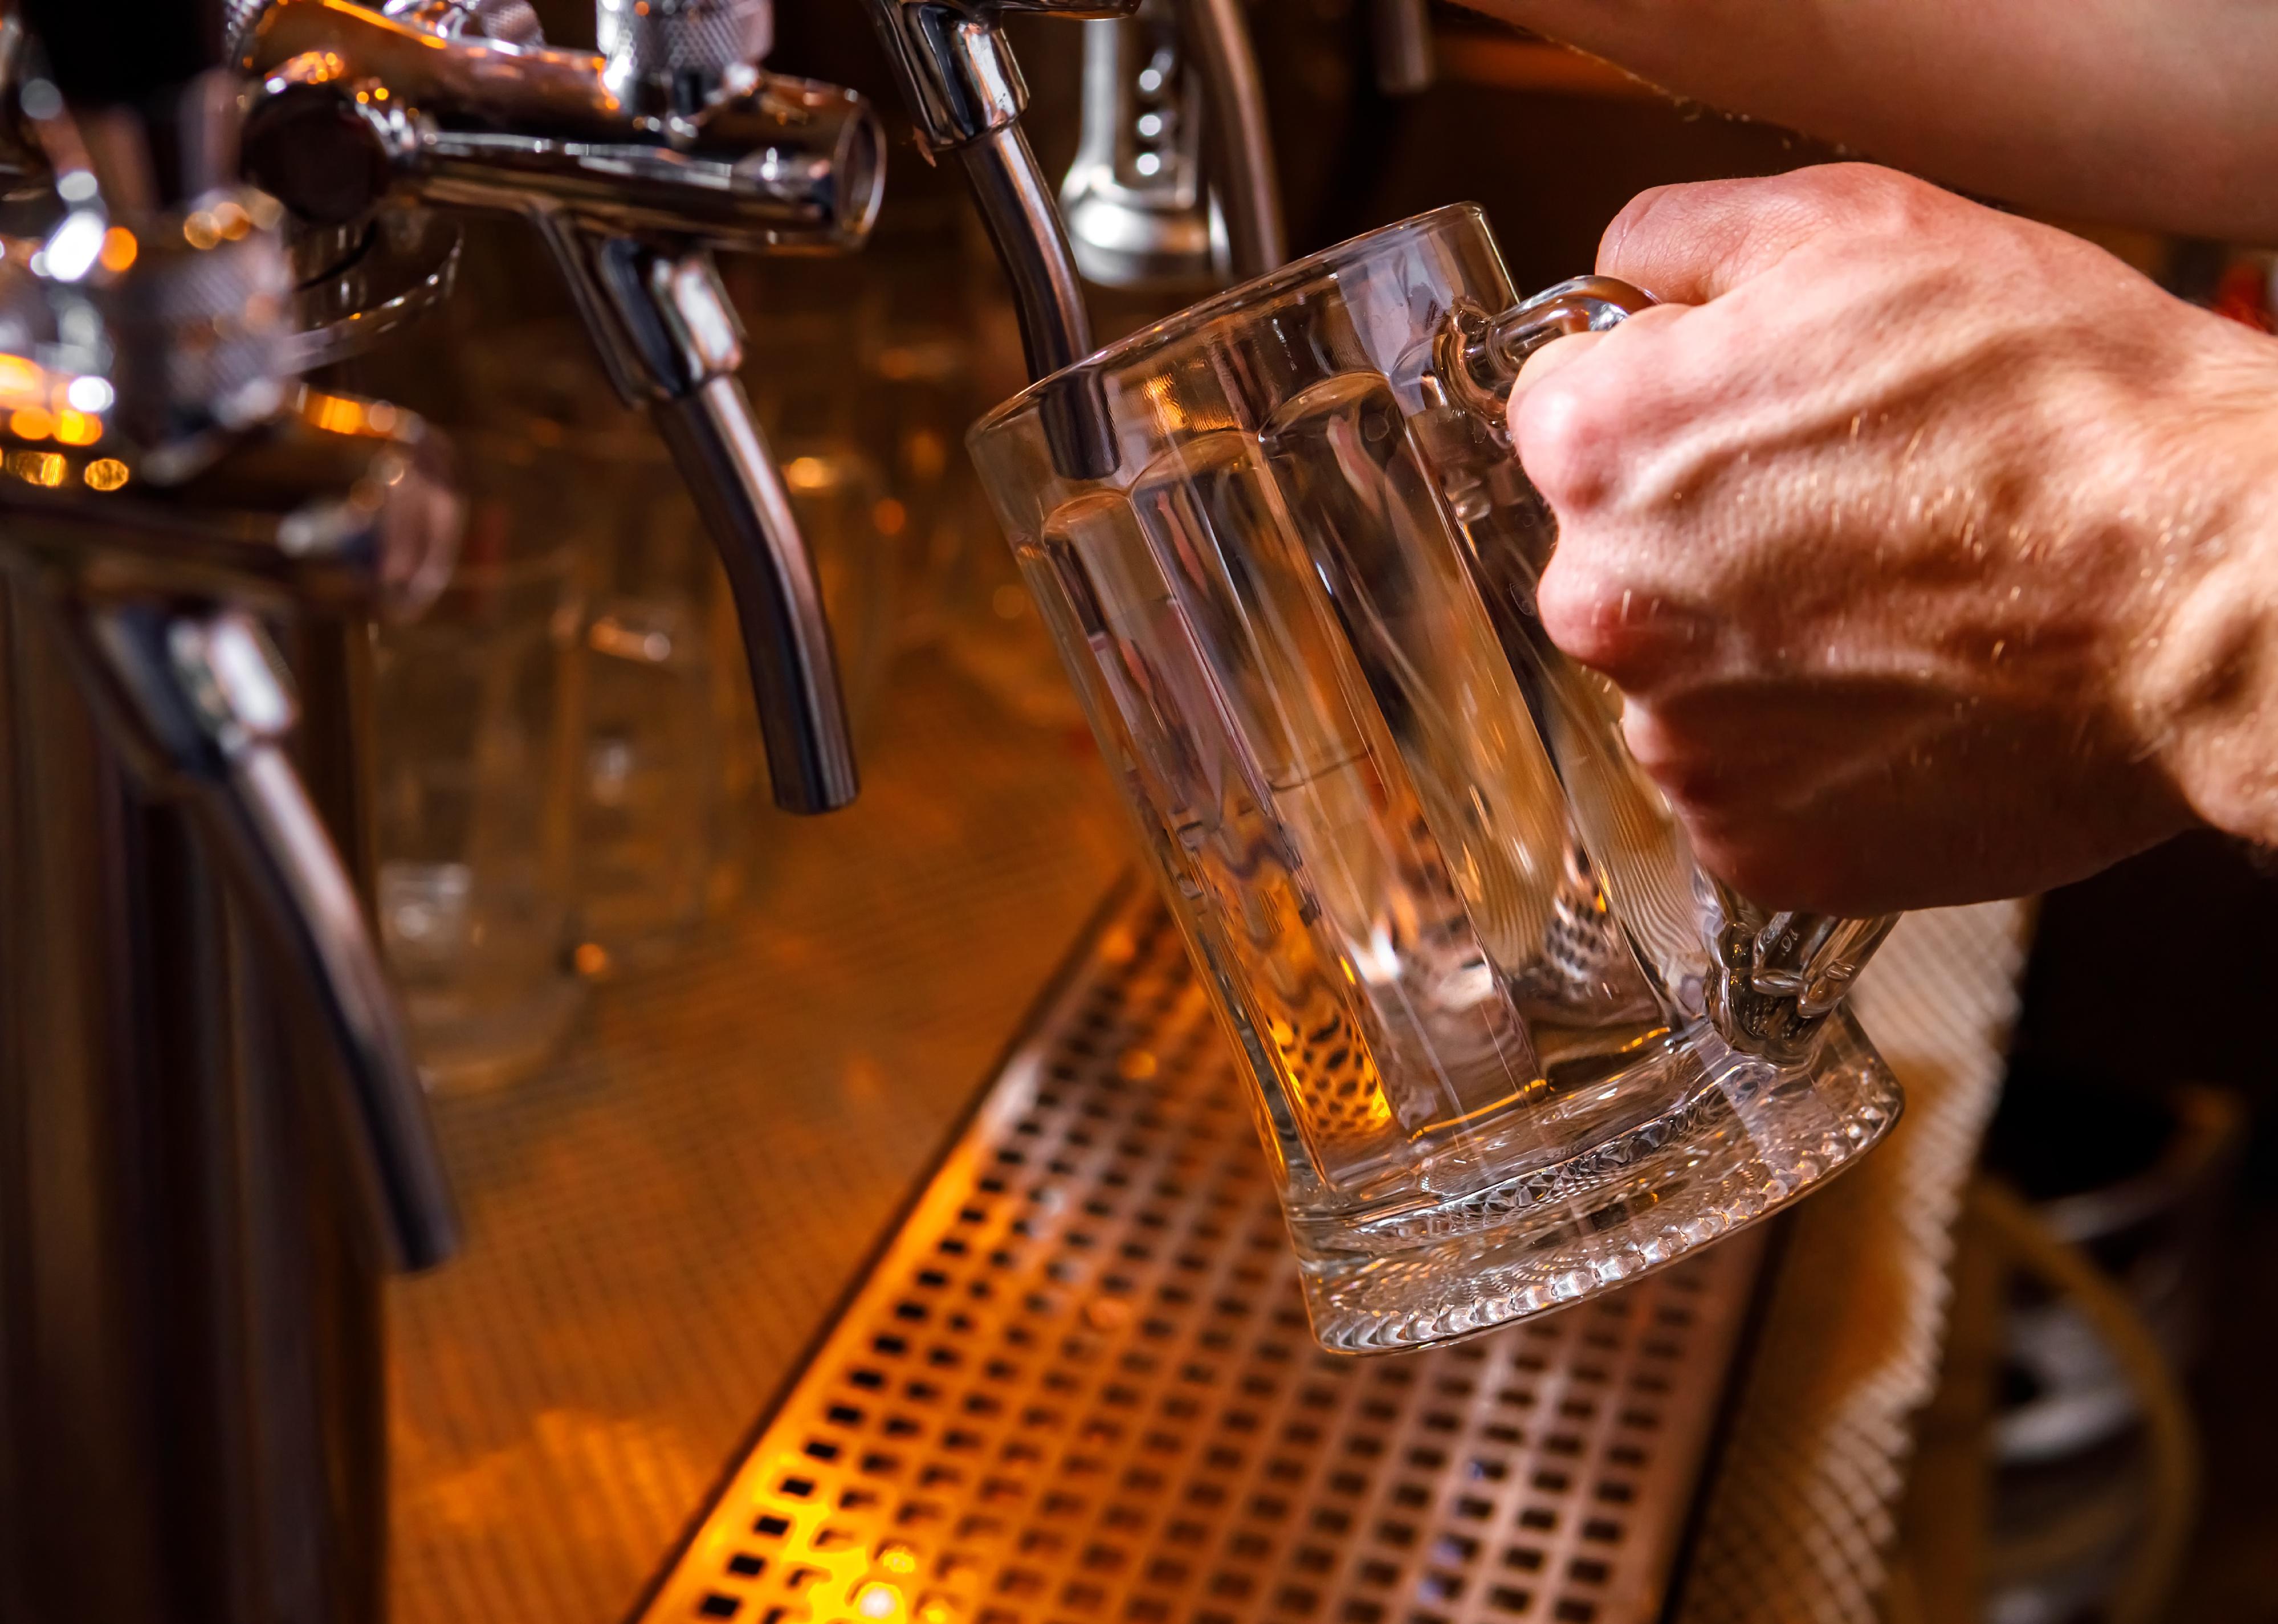 Pouring beer into a mug in a beer bar close-up